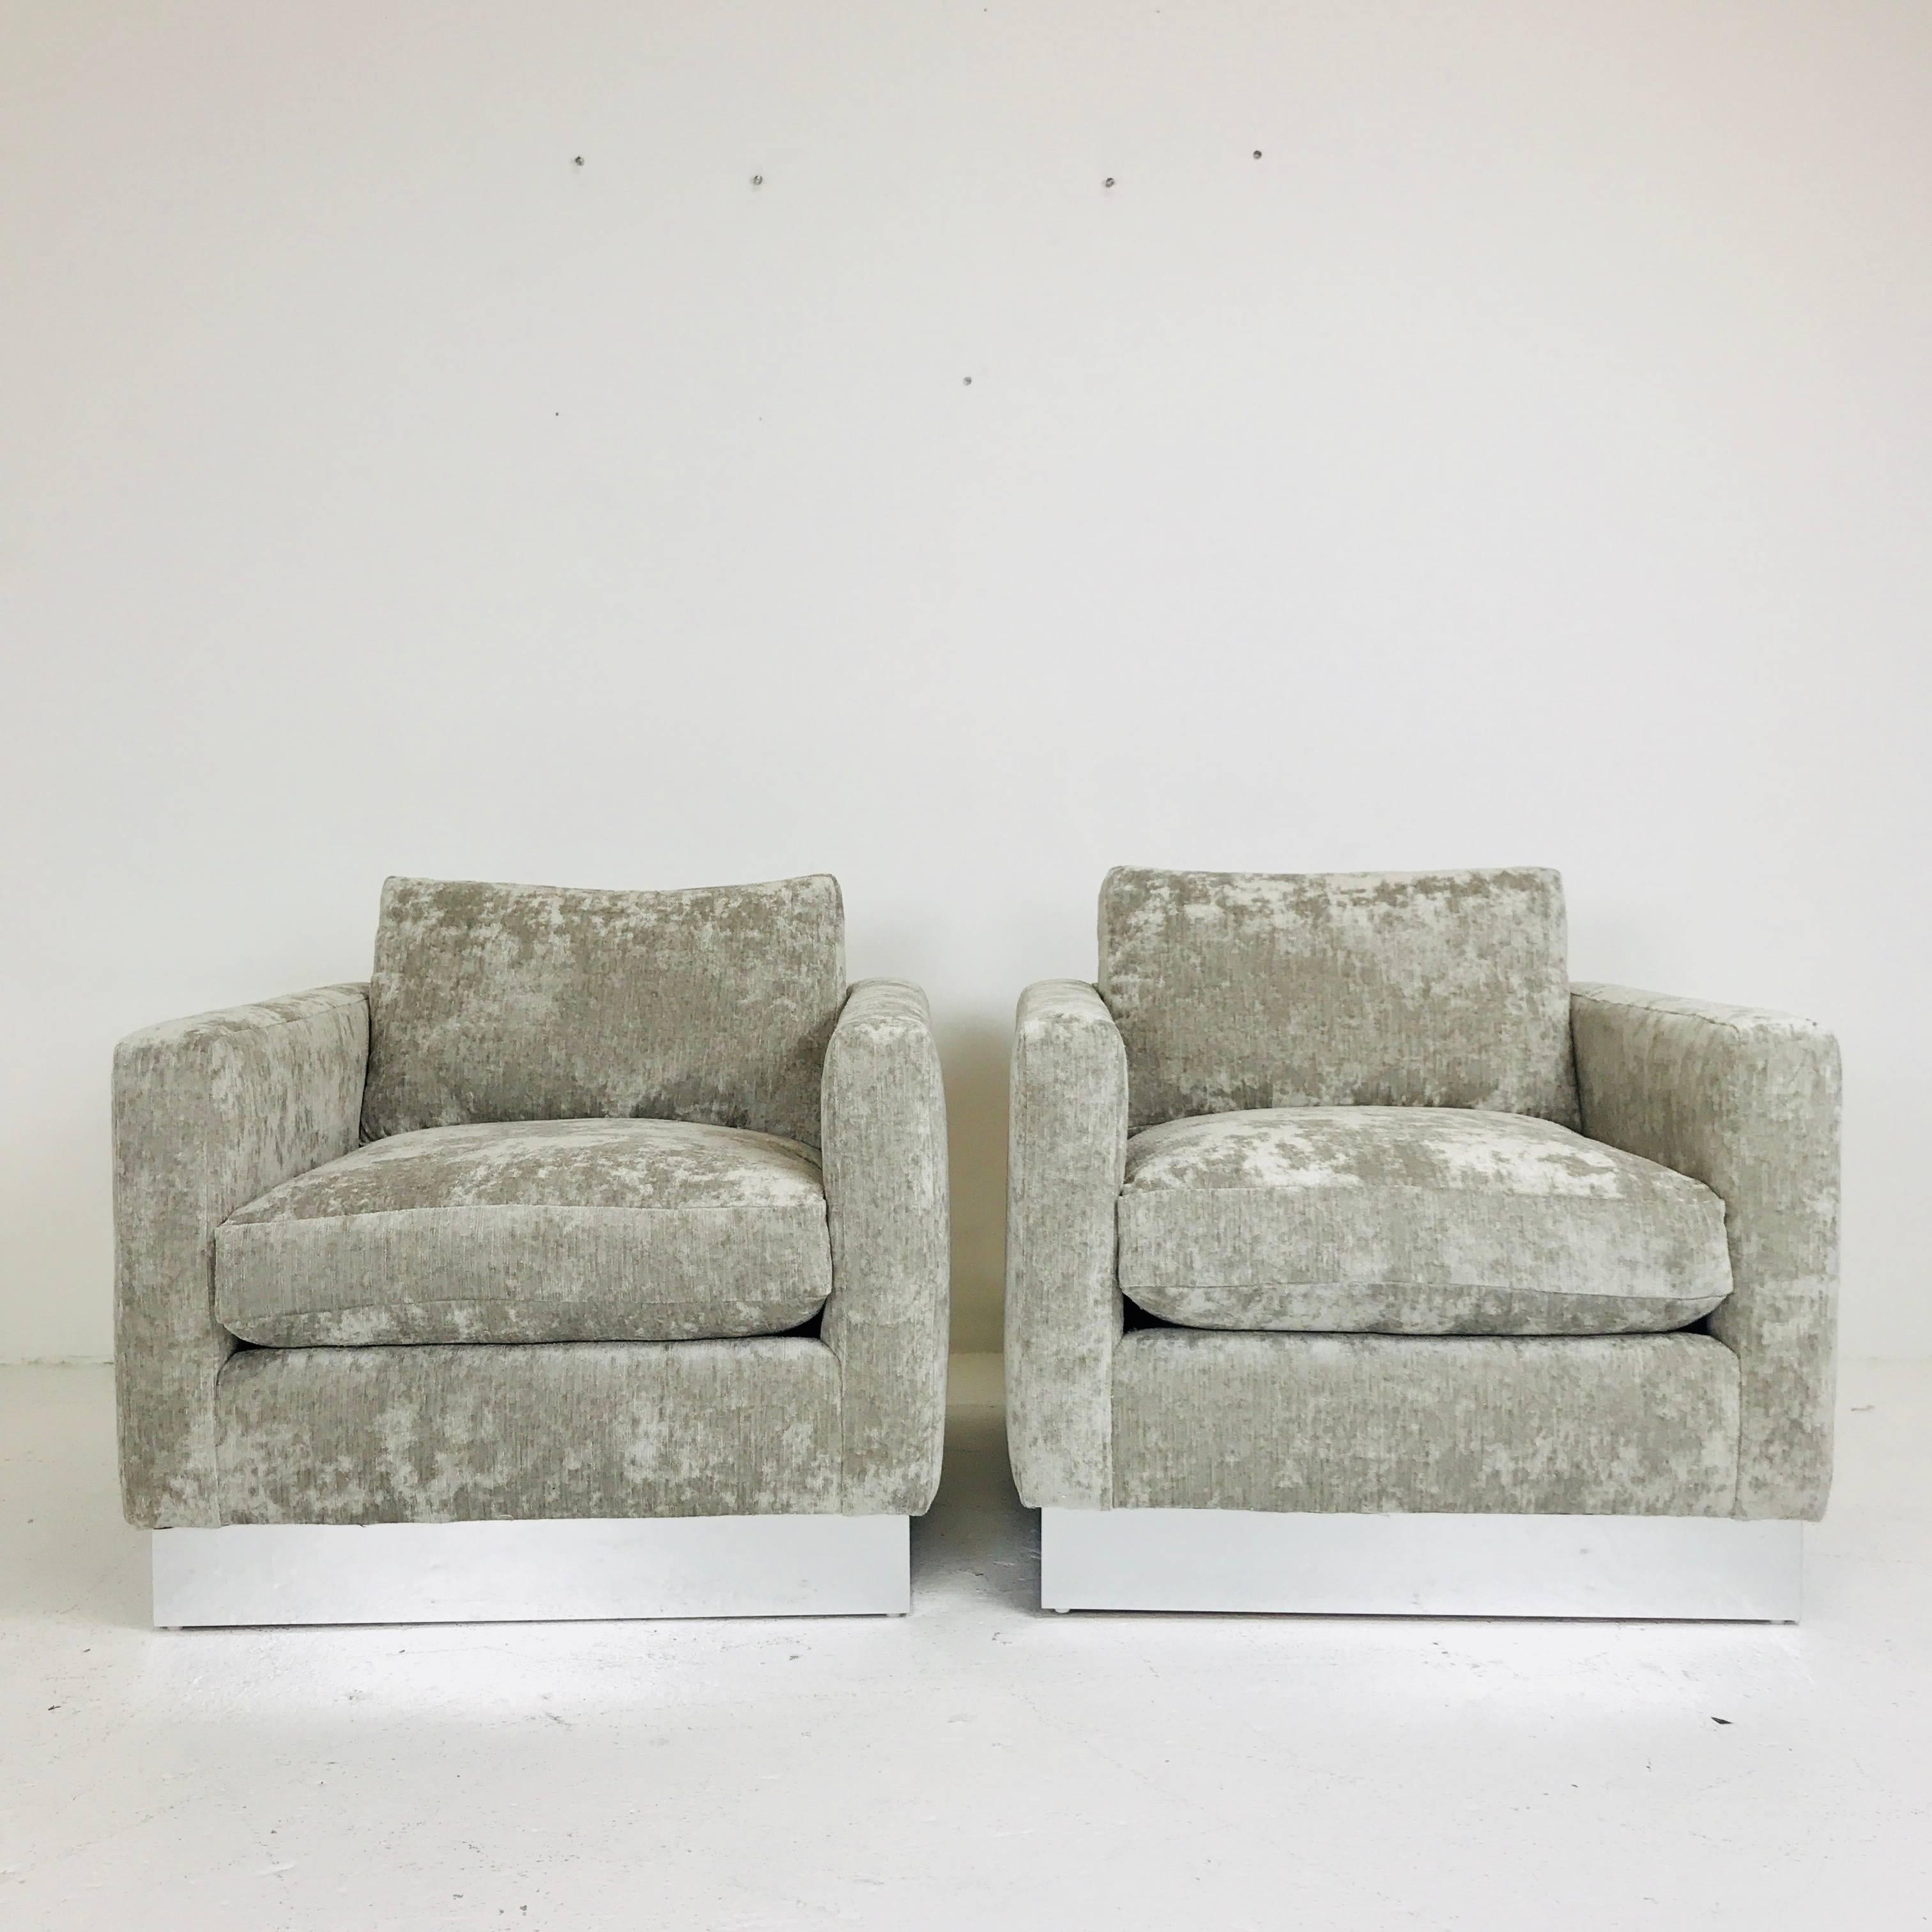 Pair of Milo Baughman Cube Chairs with Plinth Base 2